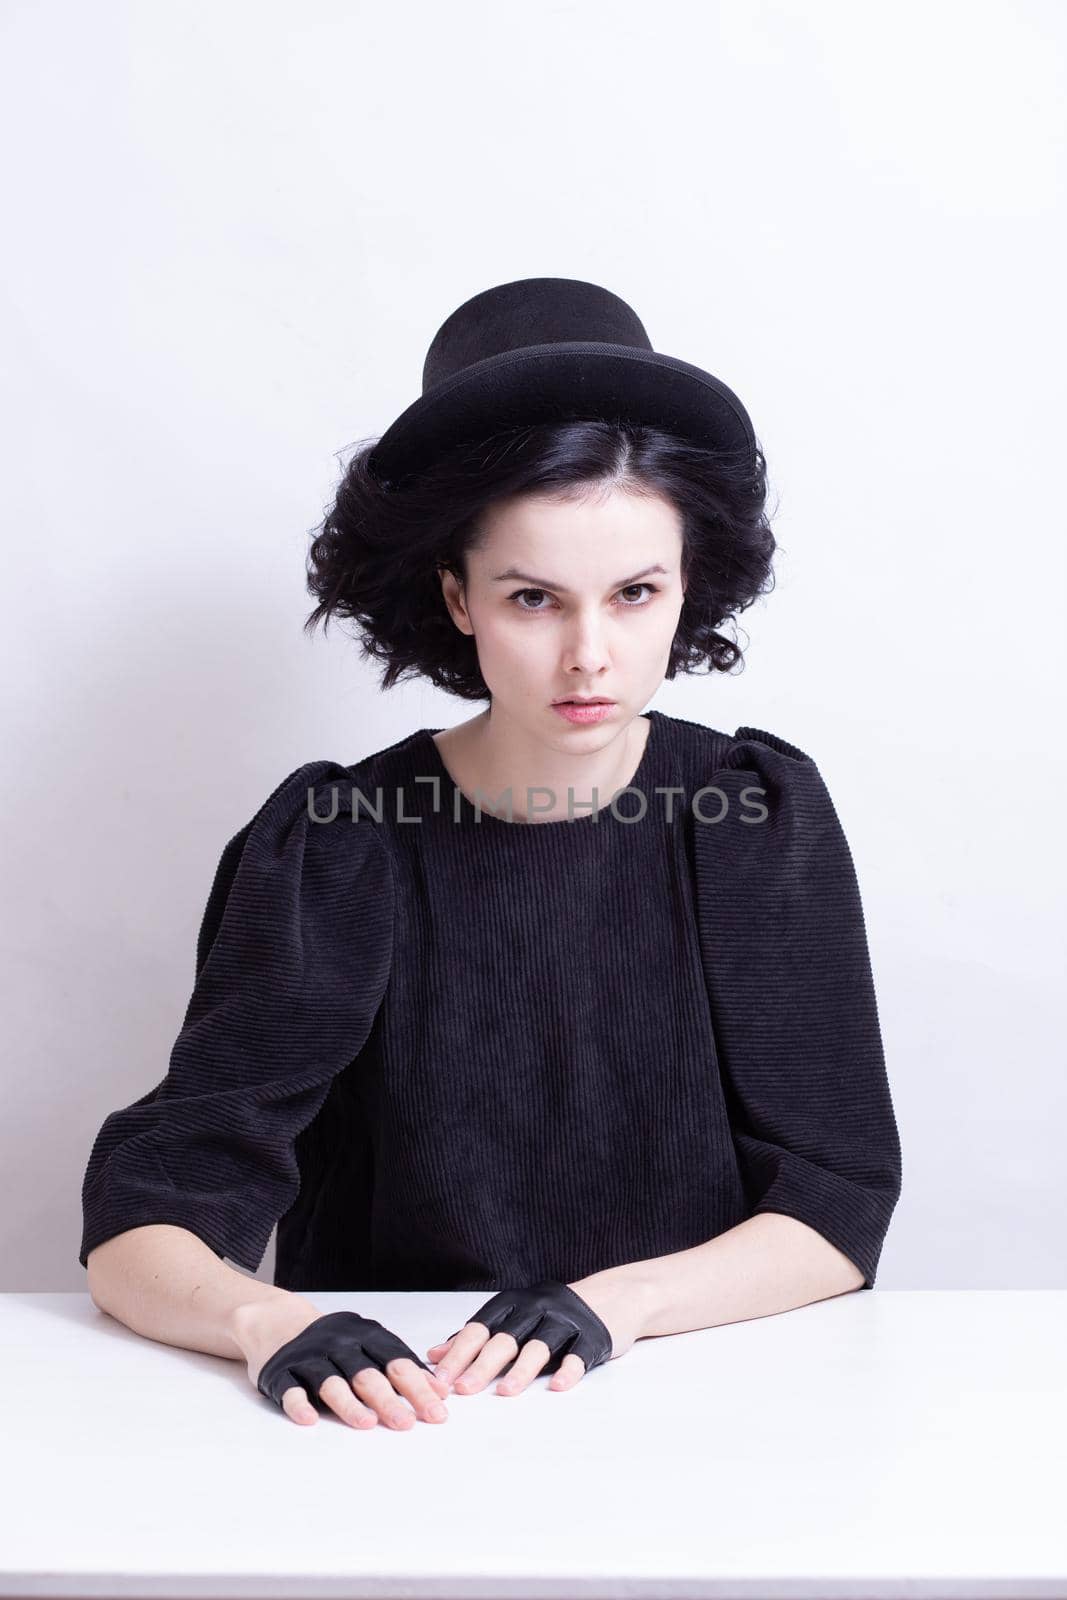 A woman in a hat and fingerless gloves sits at a table by shilovskaya